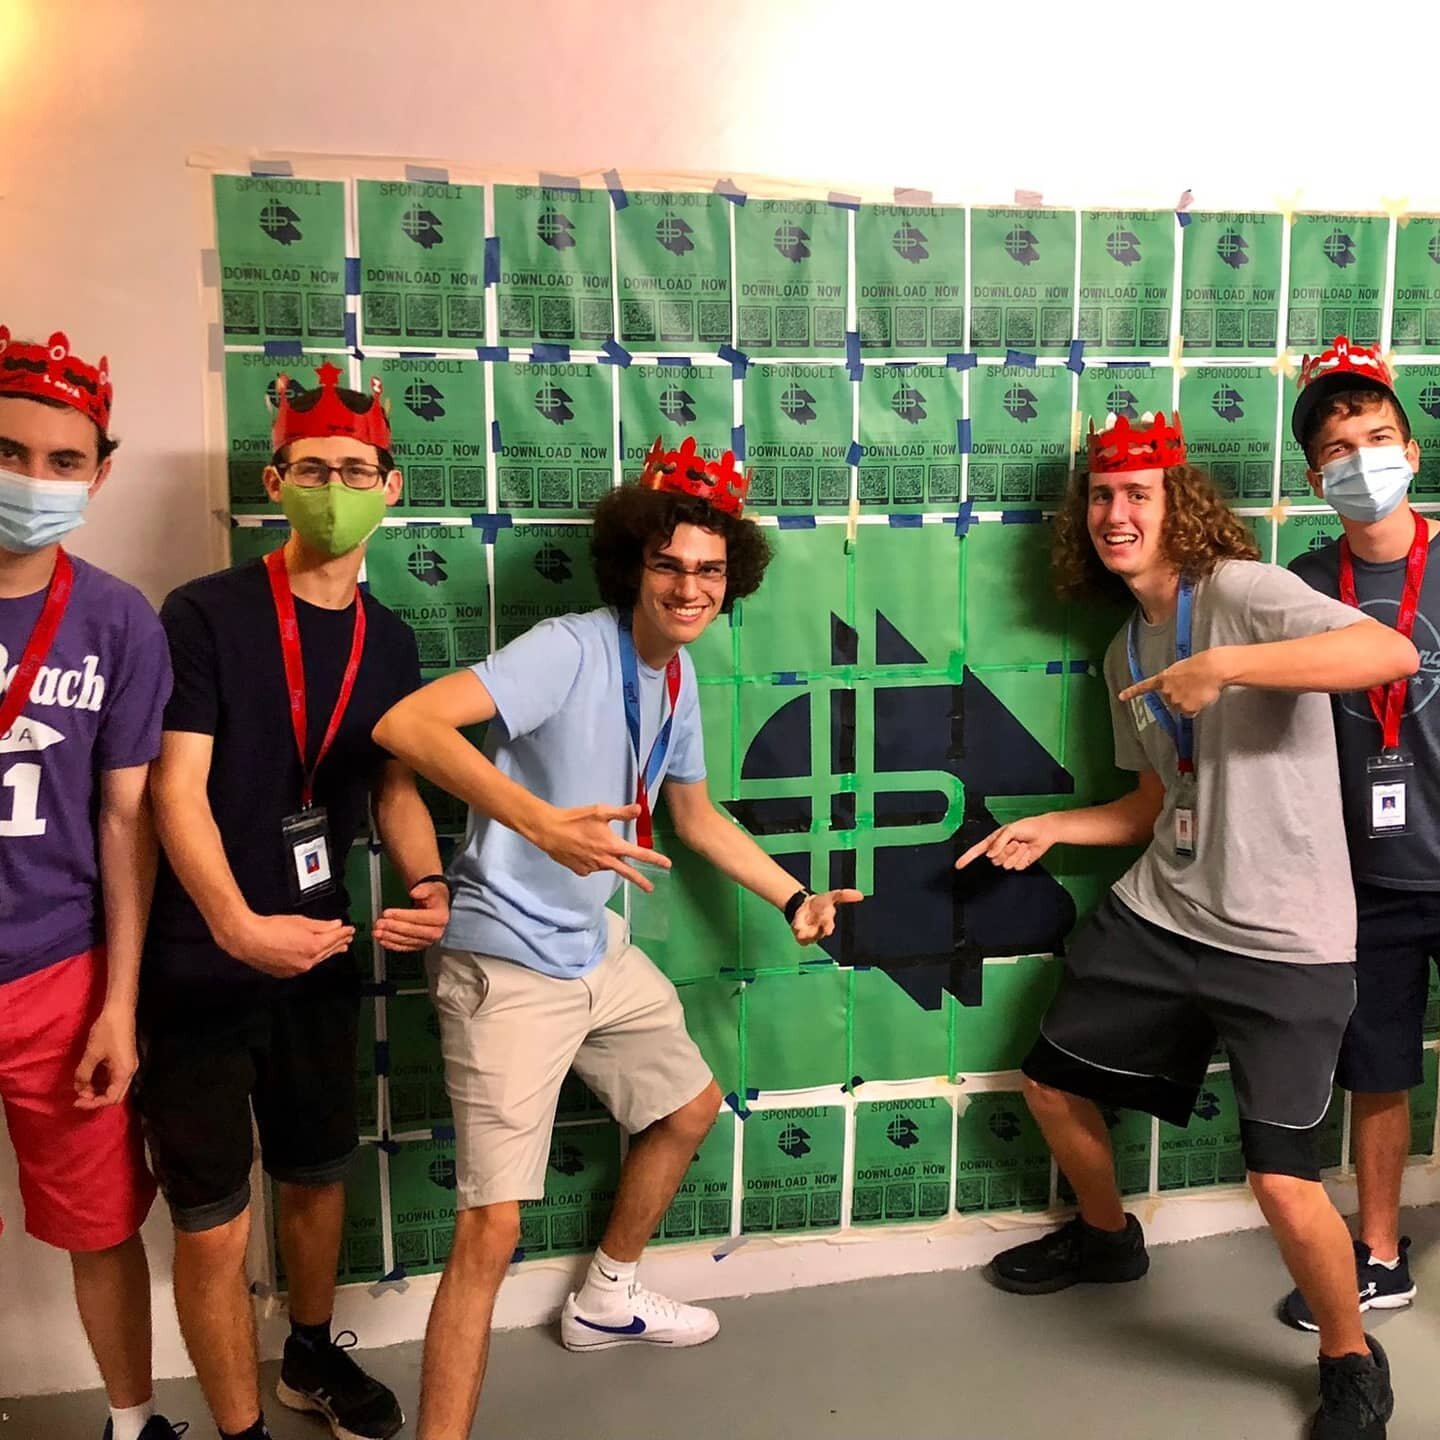 Come by outside the Computer Science room (112) and check out our Spondooli wall! Tag us if you pose infront of it, the best pose may get something special!

(RIP the &quot;Download Now!&quot; wall, someone took it down...)